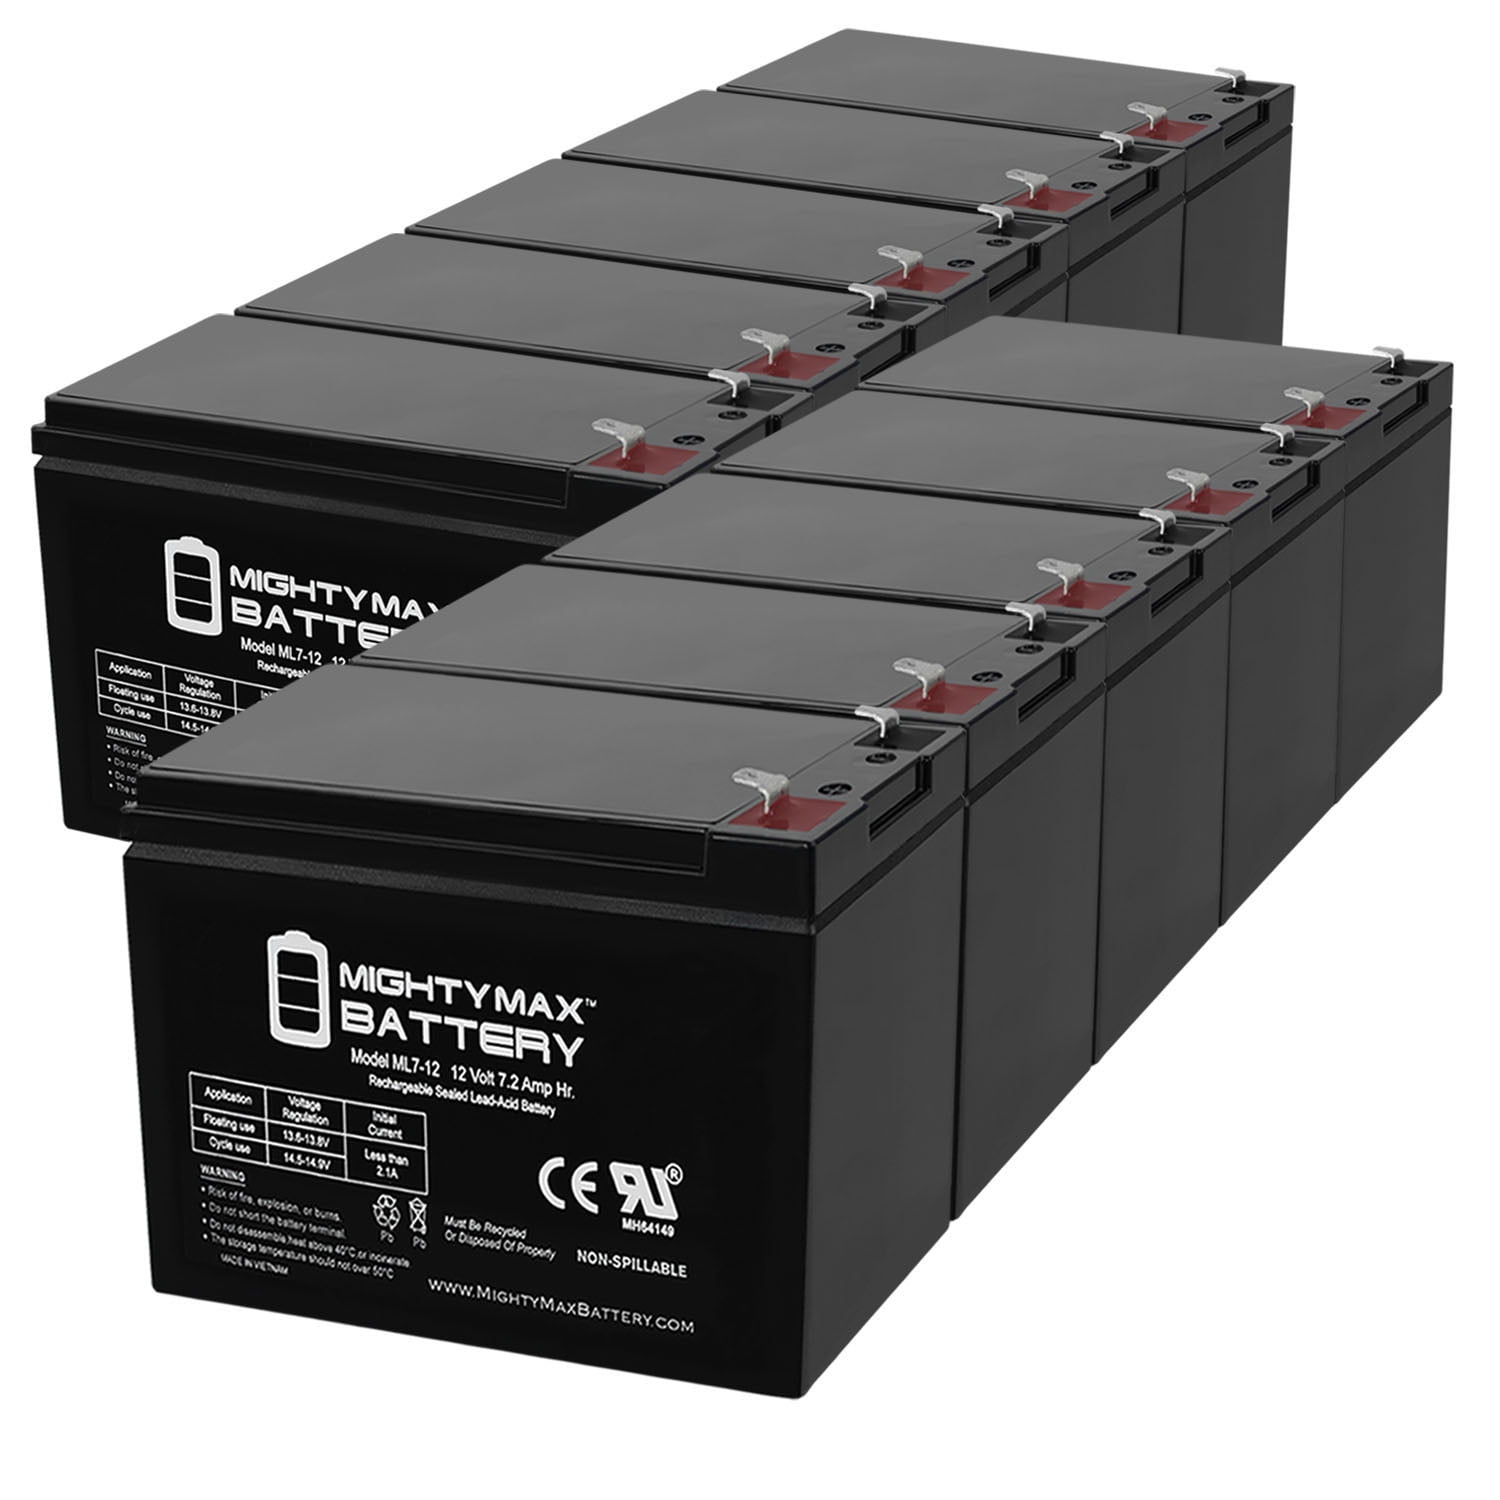 Mighty Max Battery ML7-12 12V 7.2AH GS Portalac PX12072 Replacement Battery Brand Product